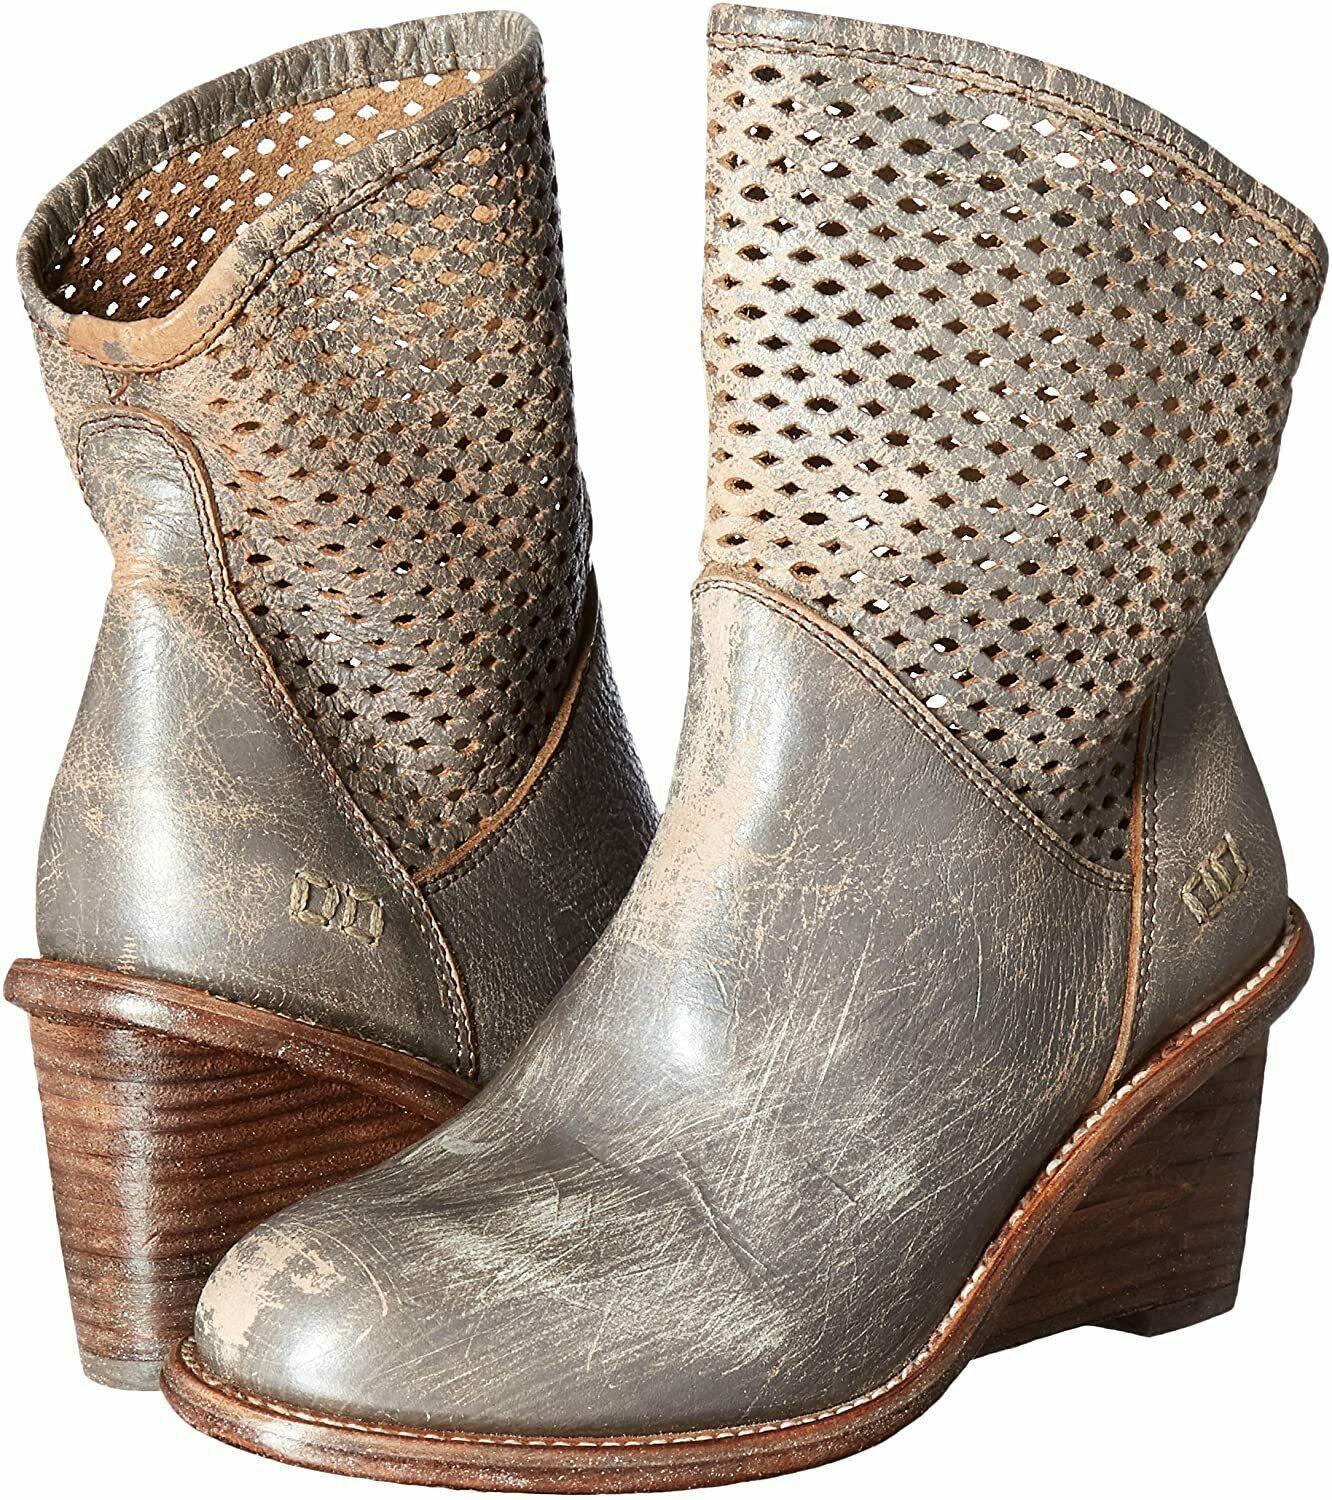 Bed Stu Duchess Smoke Grey Lux Boots Women's Distressed Booties Size US 8.5 - SVNYFancy